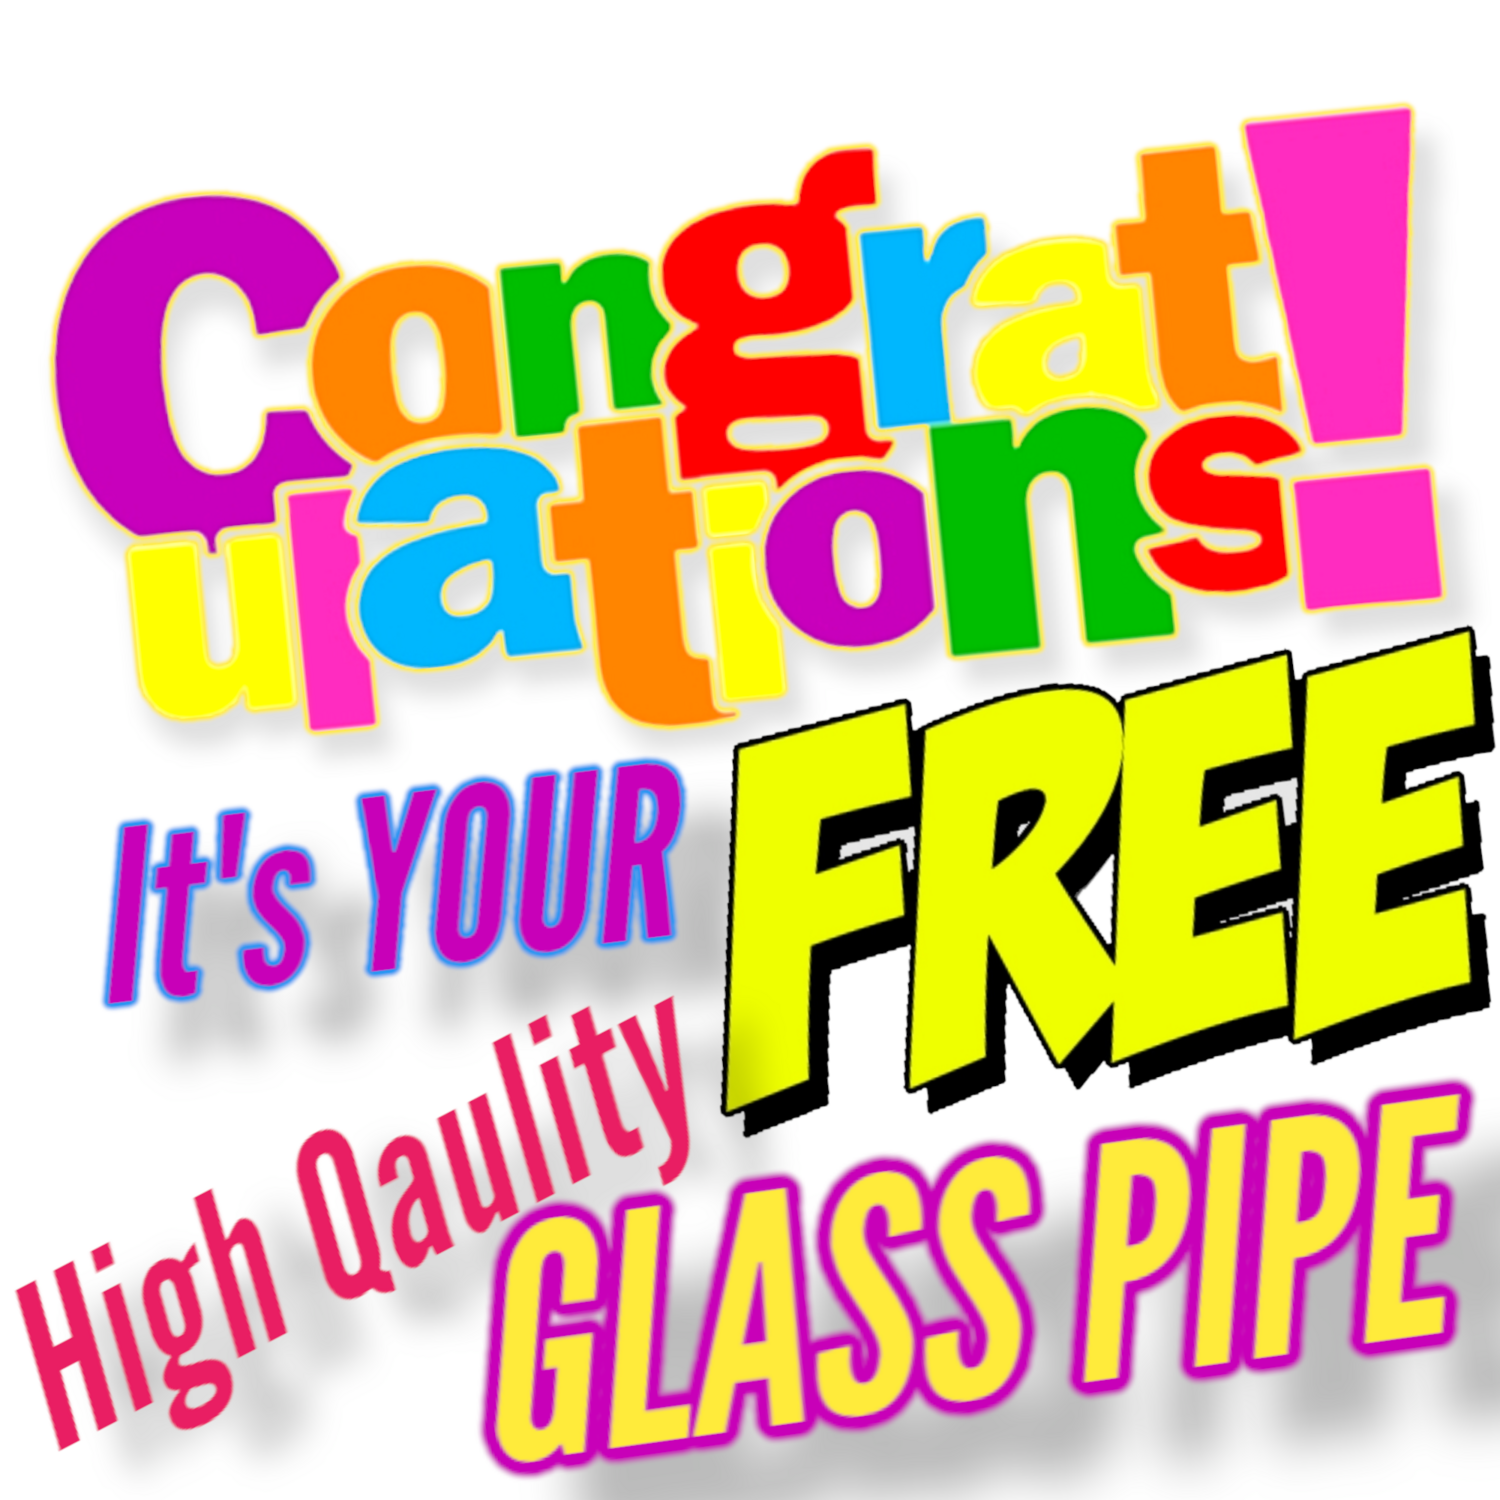 Congrats  its your Free High Quality Glass Pipe